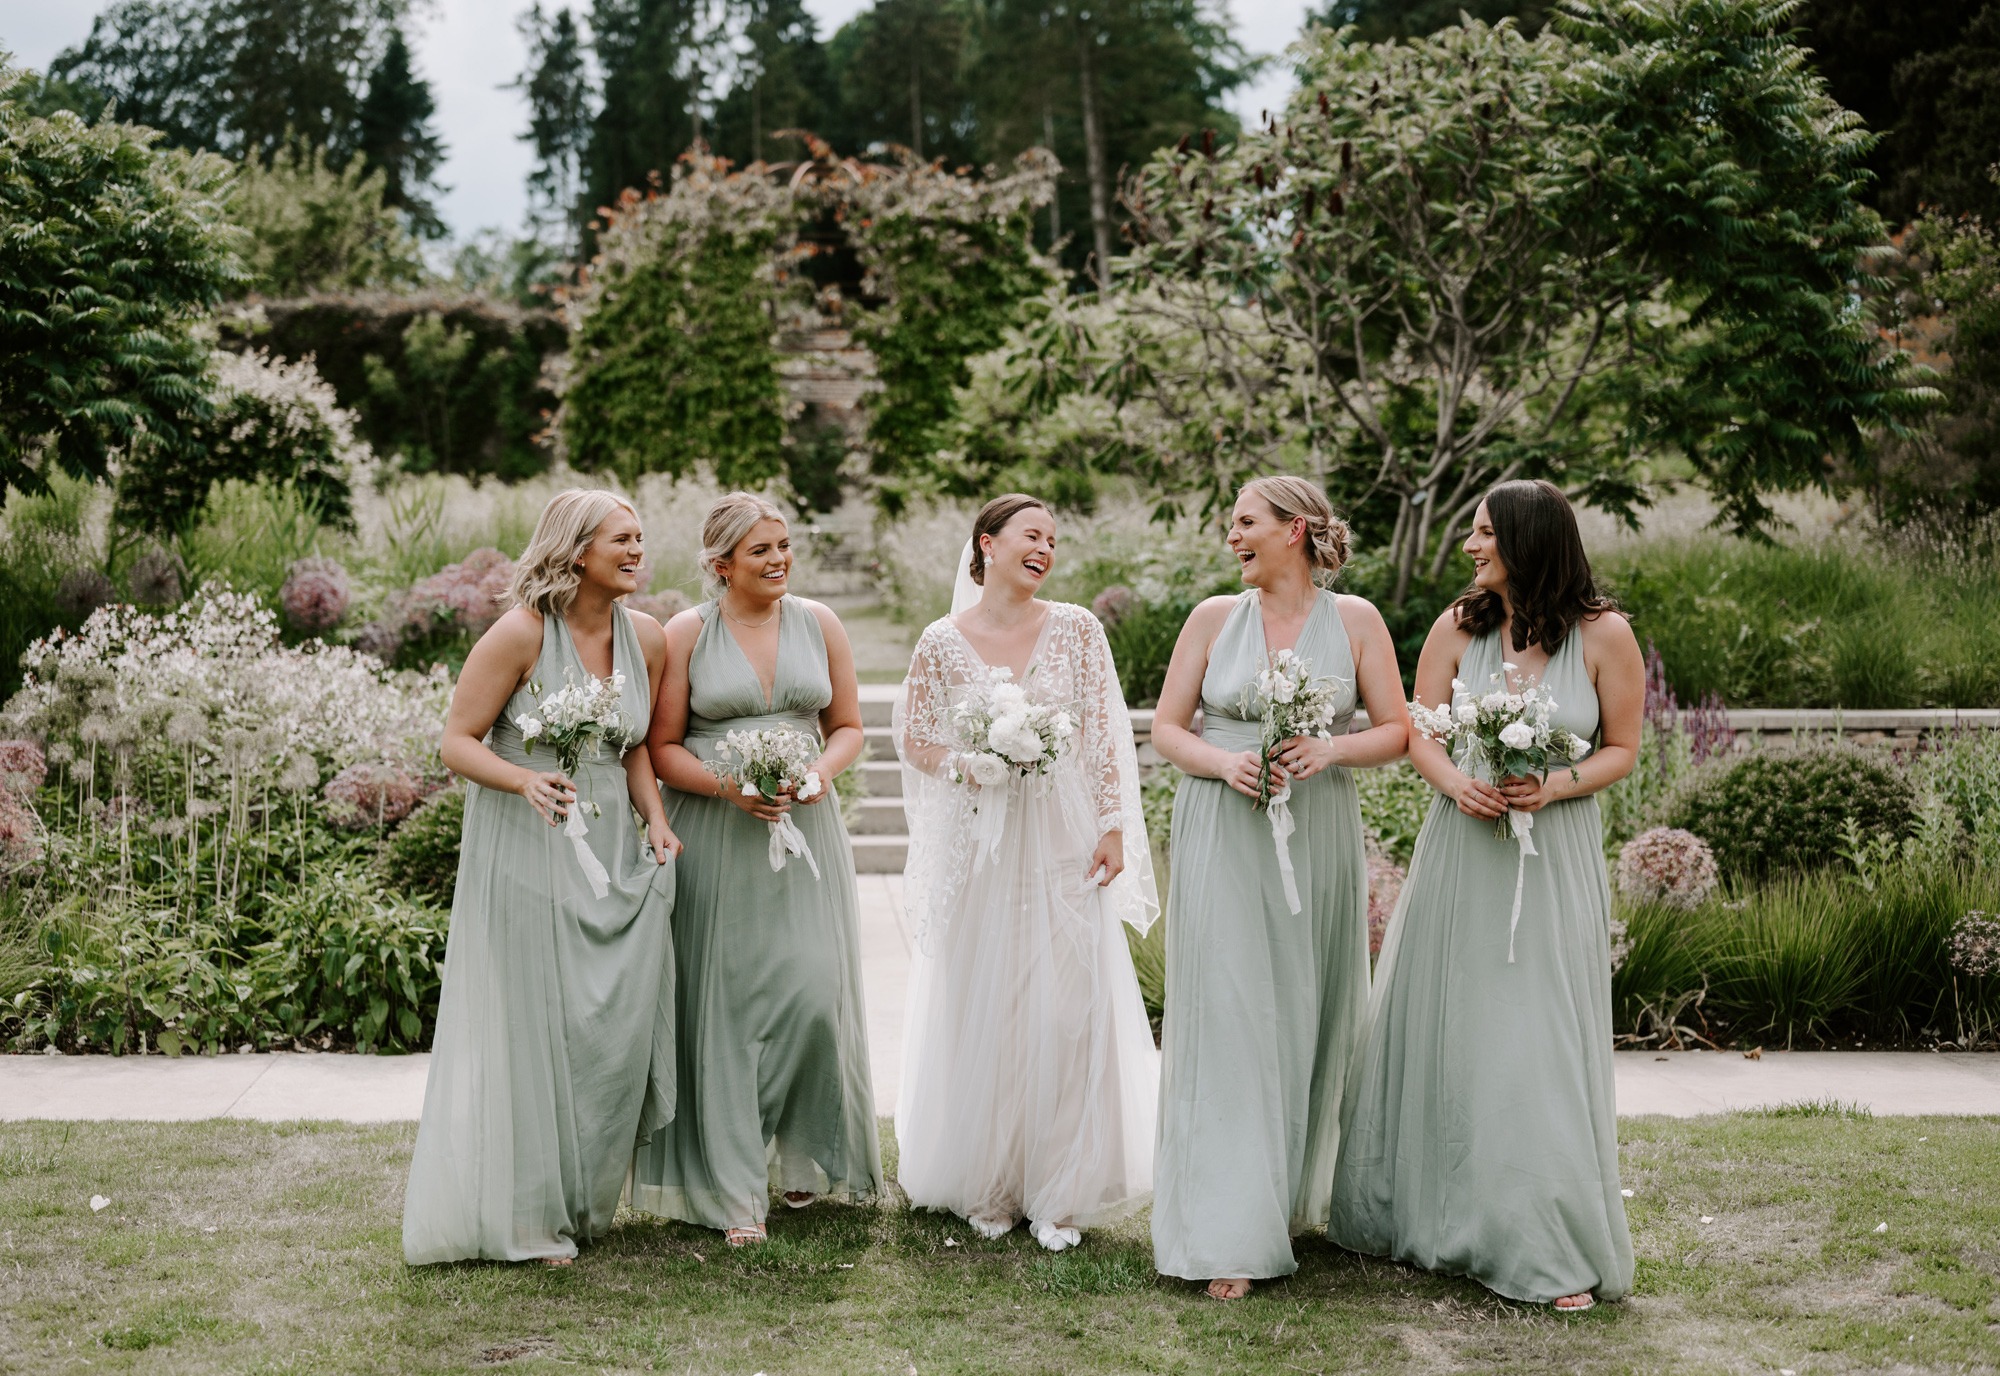 Middleton Lodge bride and bridesmaids in pale green. Moonwind wedding flowers